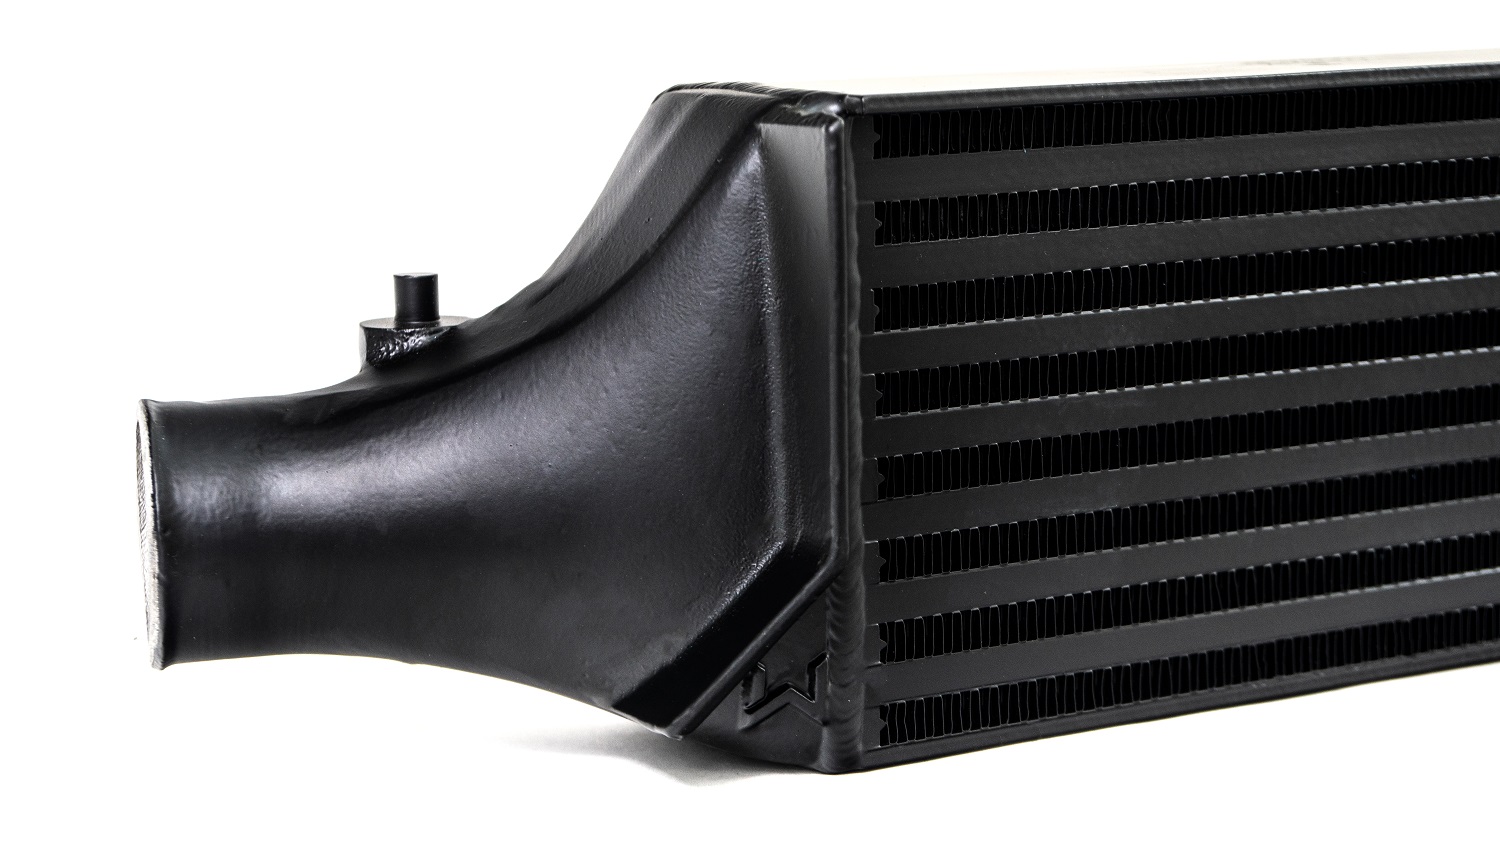 Cast aluminum endtanks provide smooth flow in and out of the 27WON Intercooler